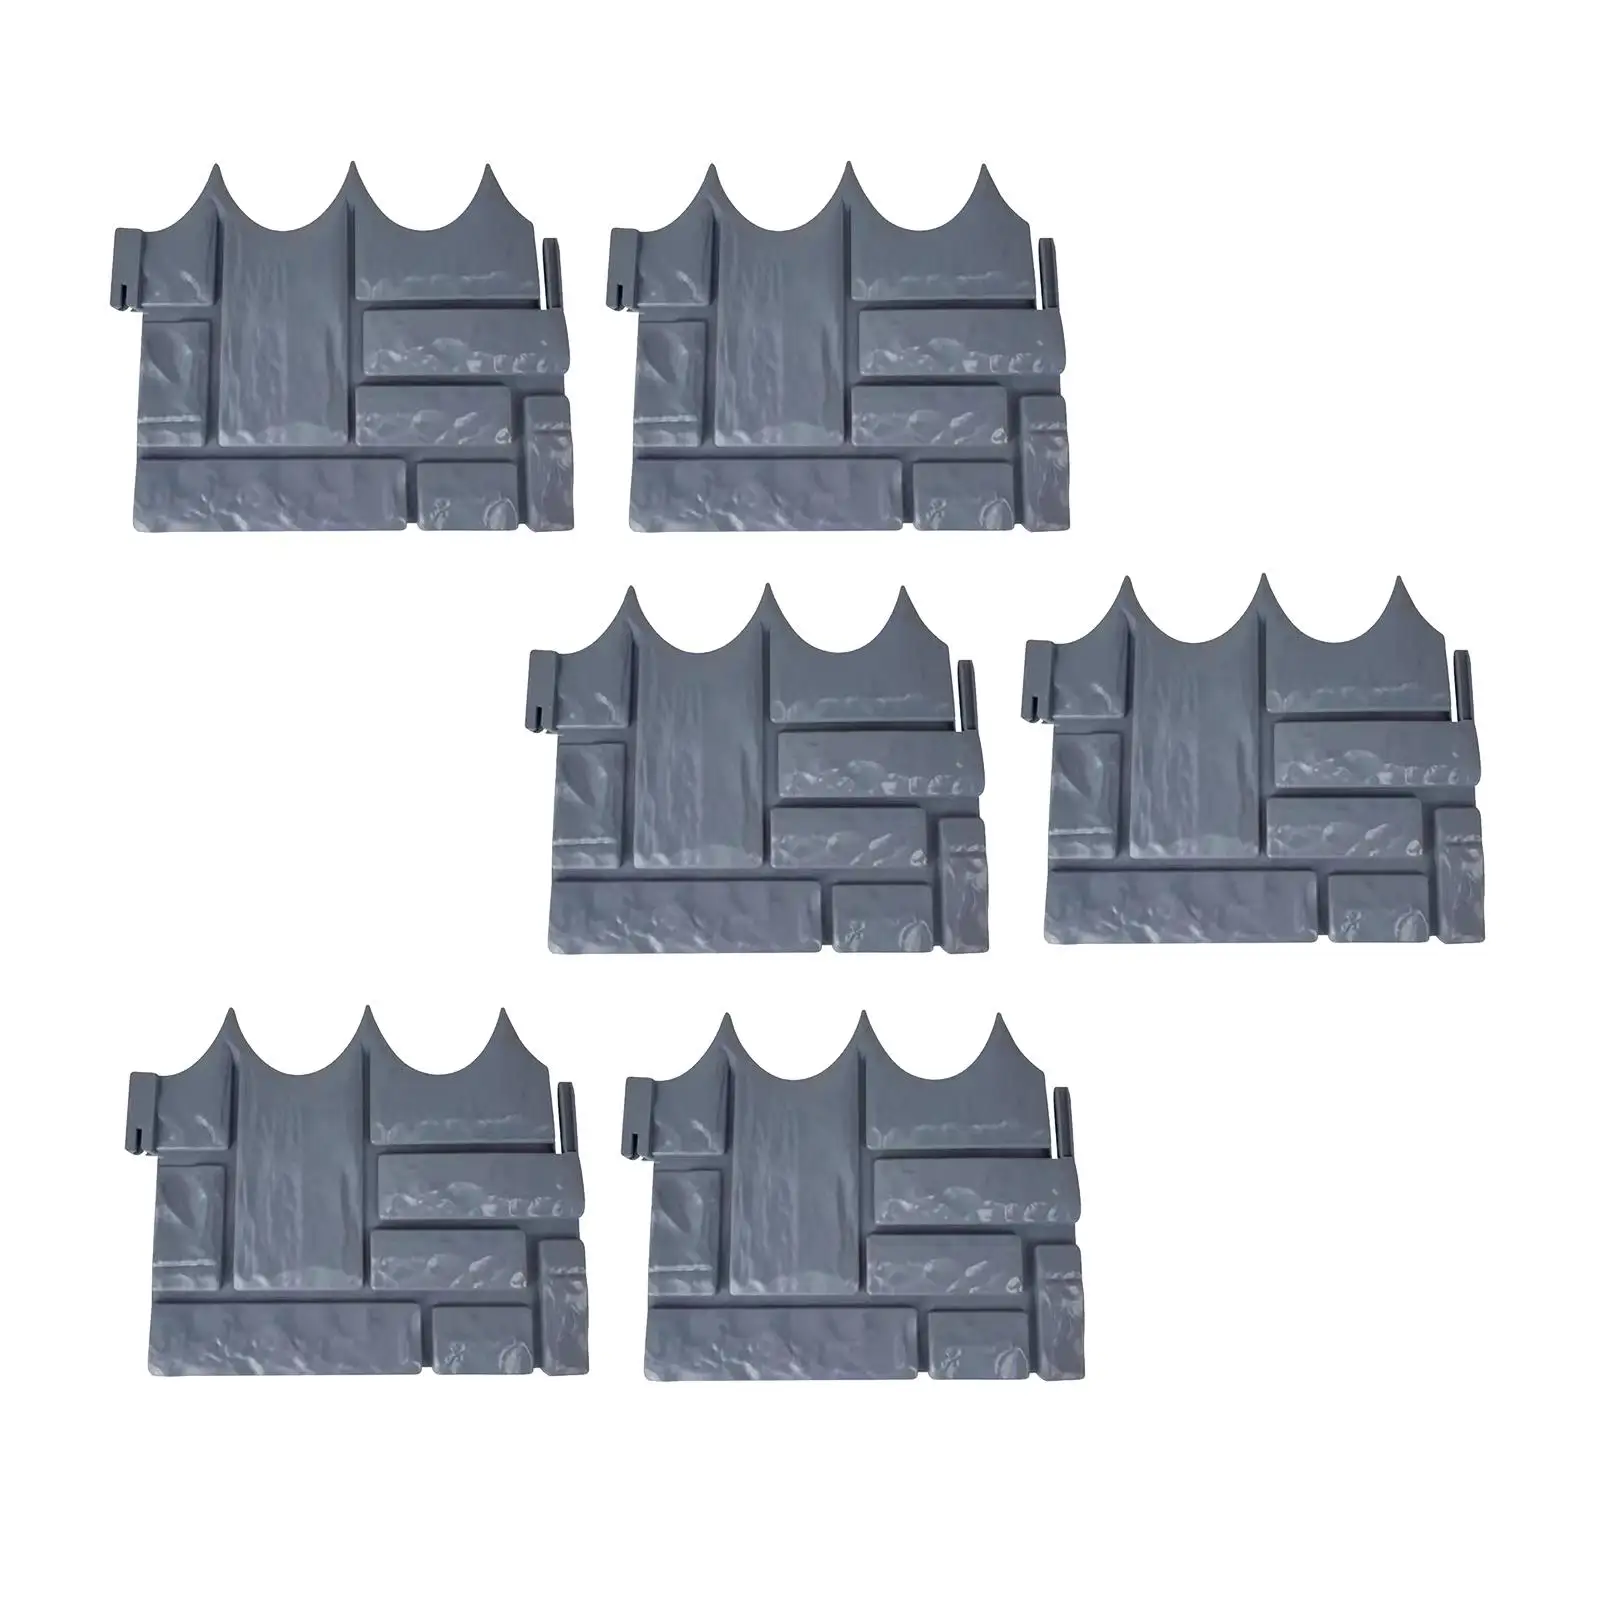 6 Pieces Garden Imitation Stone Fence Sturdy for Patio Landscaping Garden